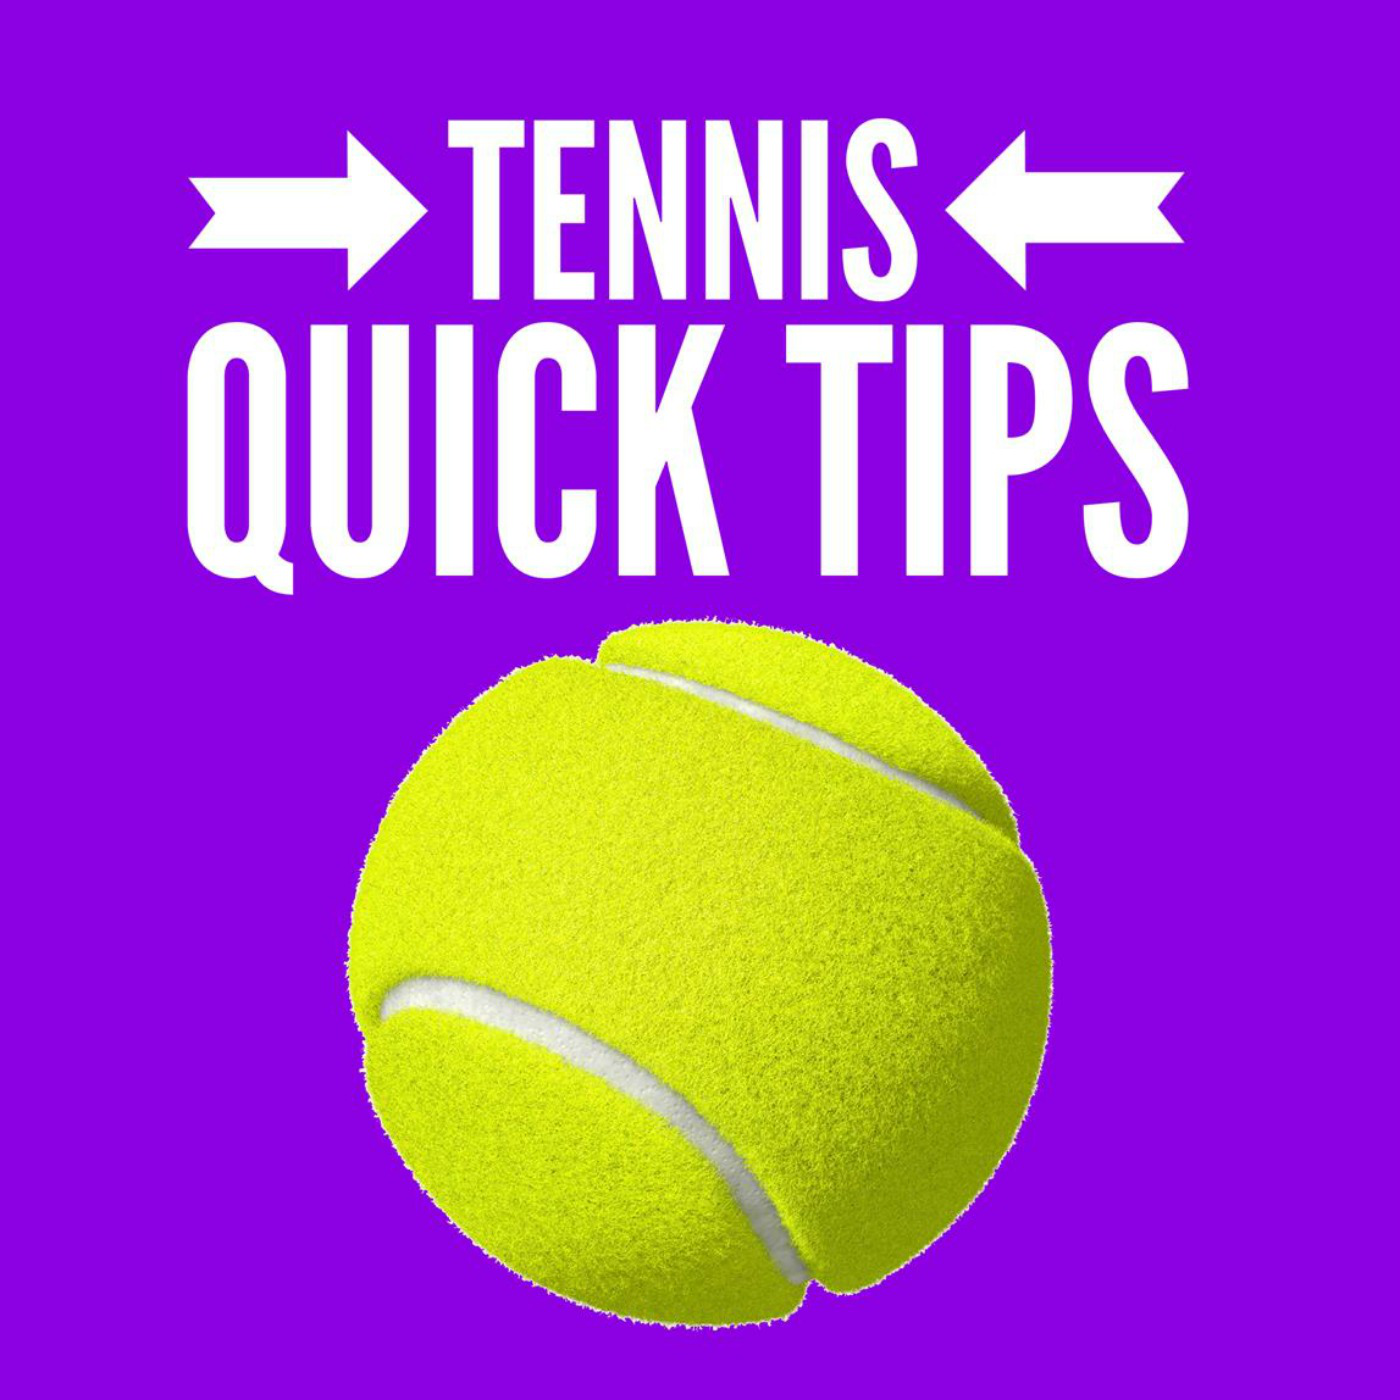 Hælde Skov dash Tennis Quick Tips | Fun, Fast and Easy Tennis - No Lessons Required : Free  Audio : Free Download, Borrow and Streaming : Internet Archive